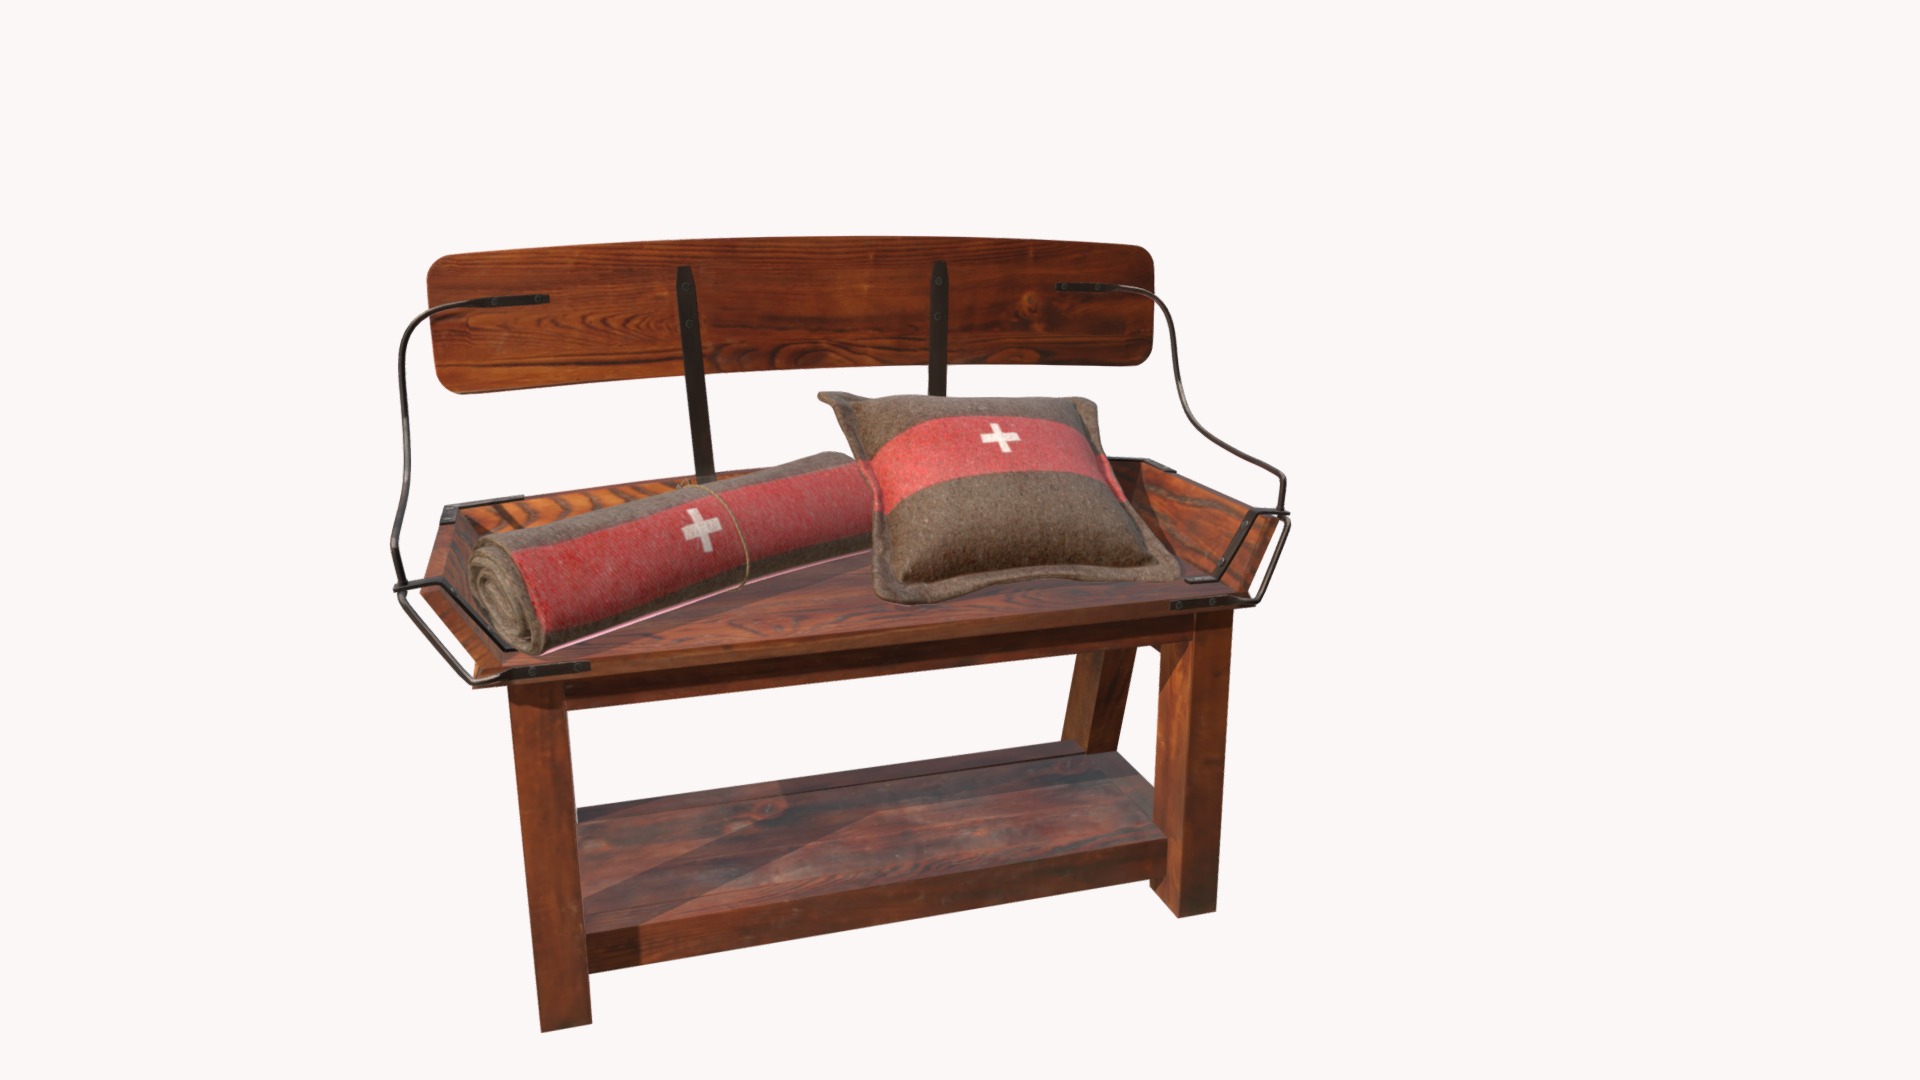 3D model Buckboard Bench - This is a 3D model of the Buckboard Bench. The 3D model is about a wooden chair with a pillow.